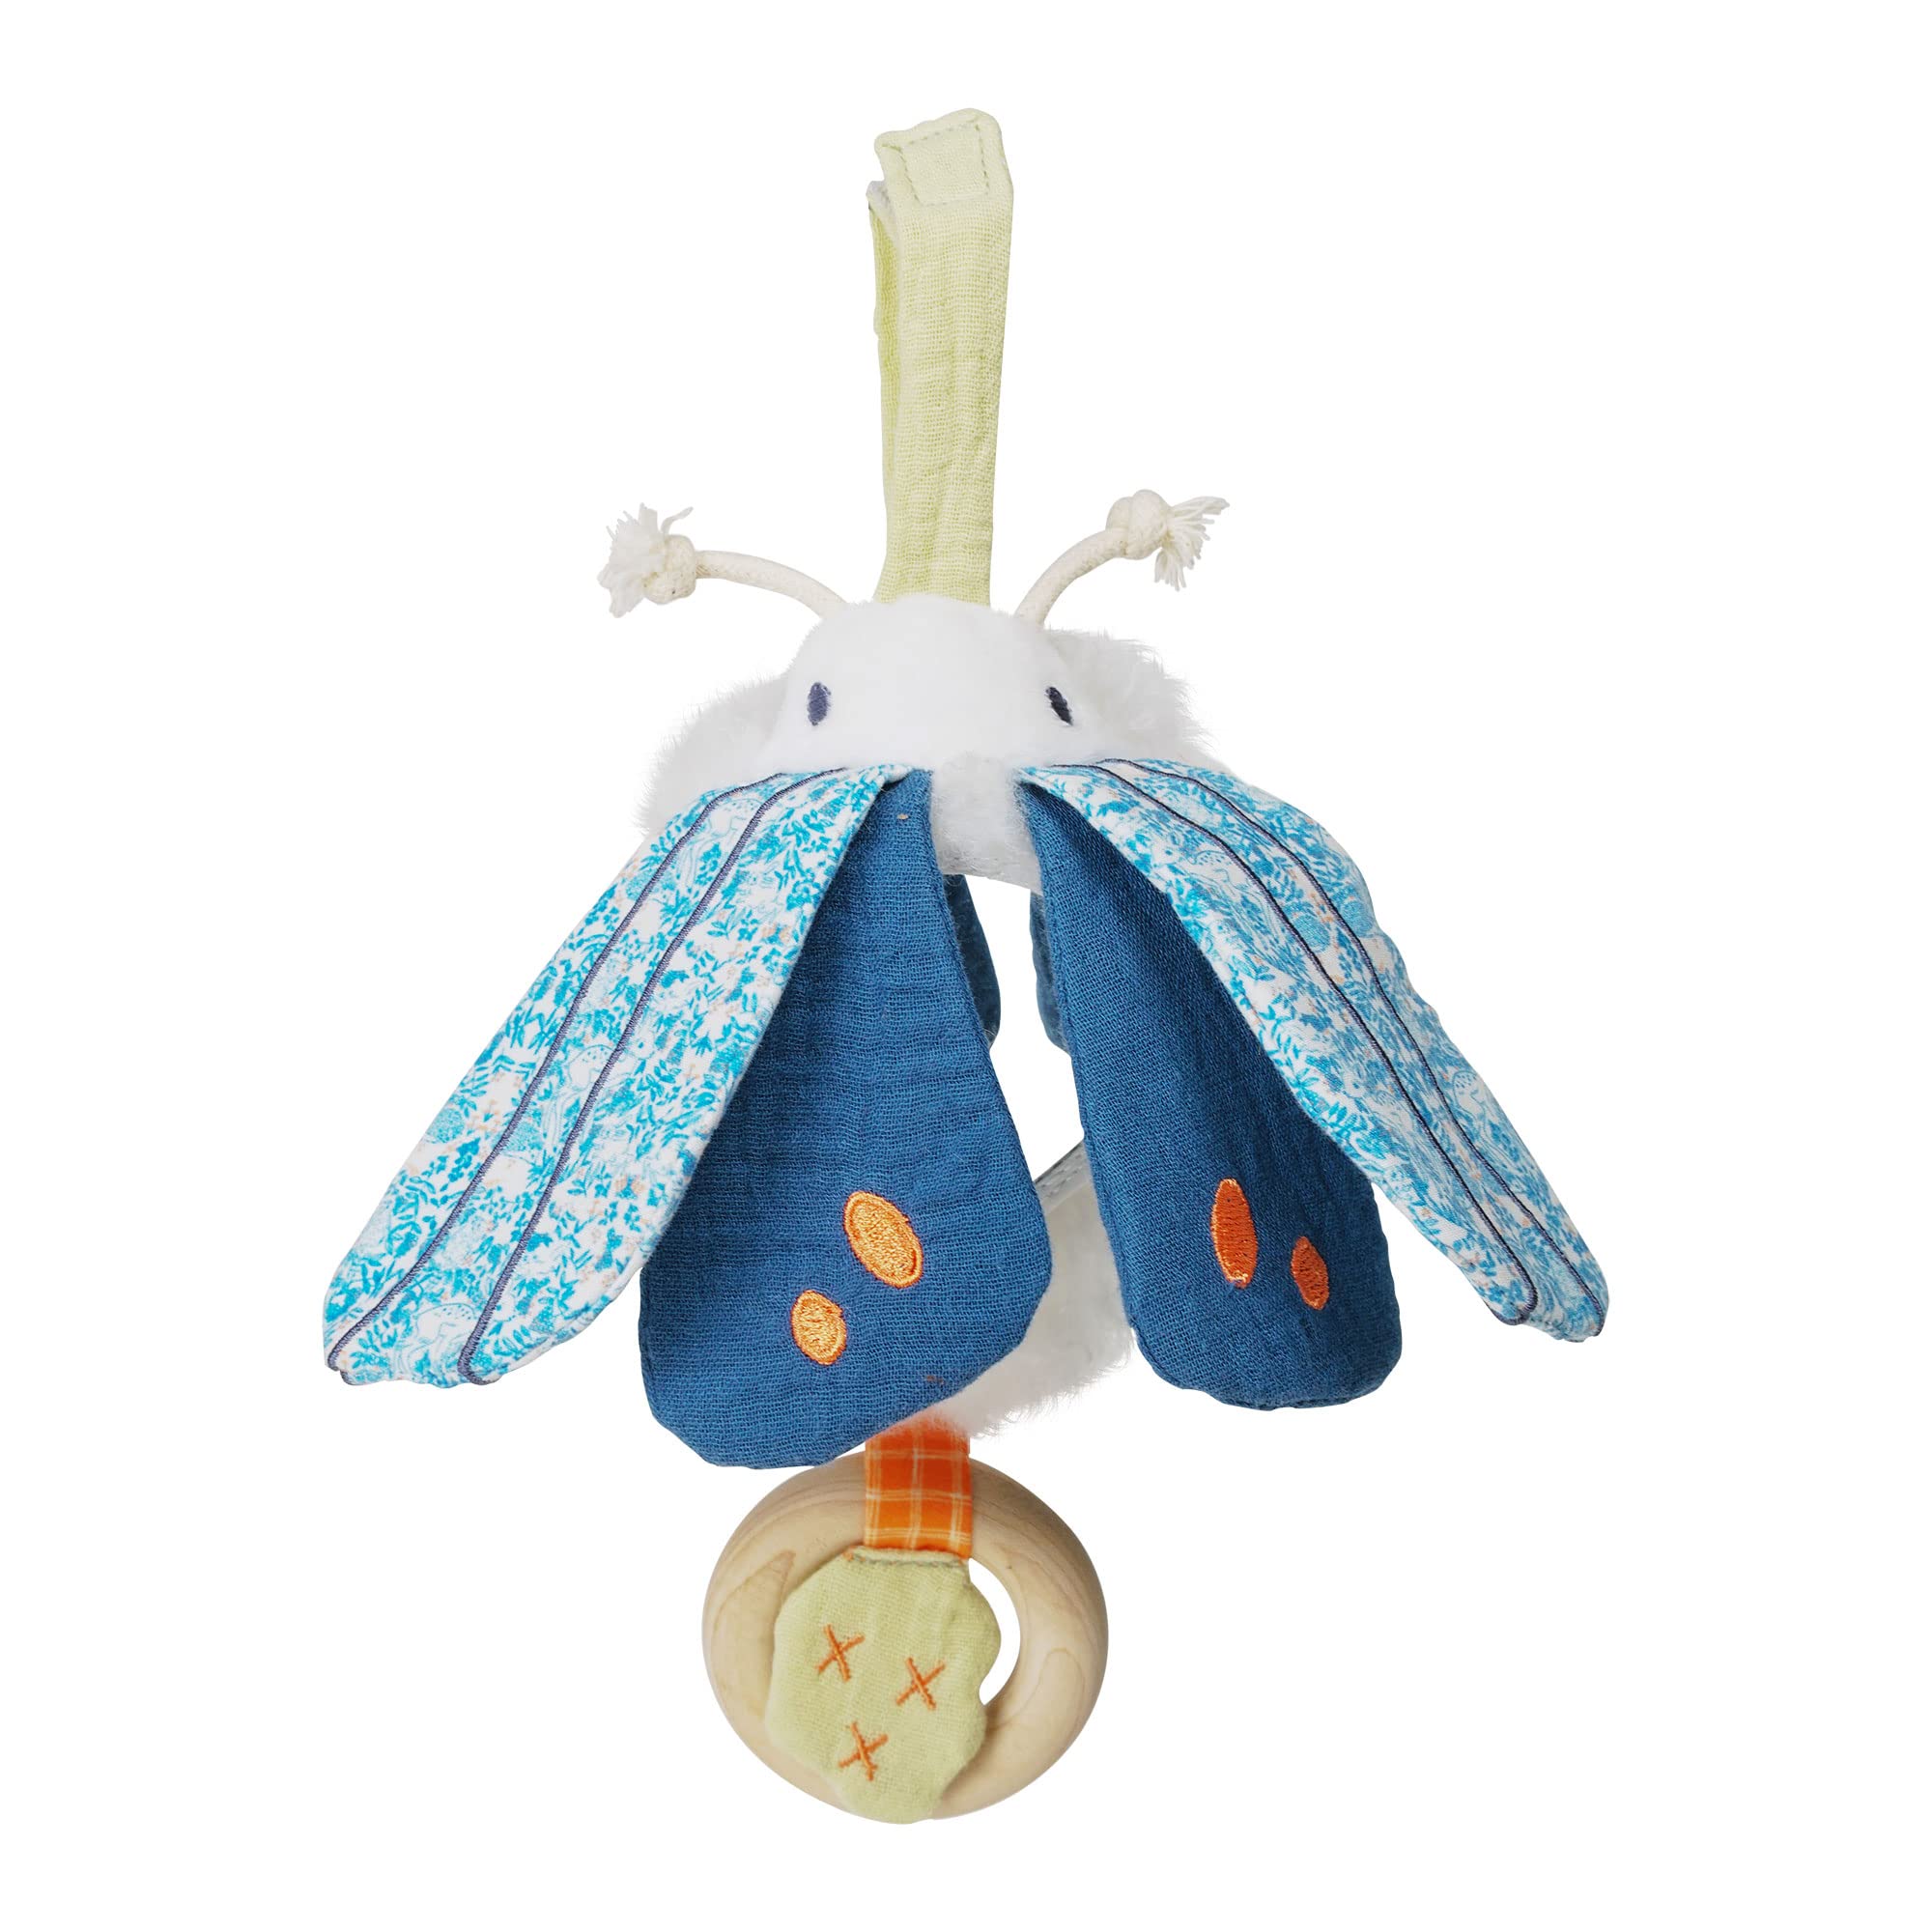 Manhattan Toy Folklore Plush Luna Moth Soft Tactile Baby Travel Toy with Crinkle Fabric Wings, Baby Mirror and Wooden Teether Ring